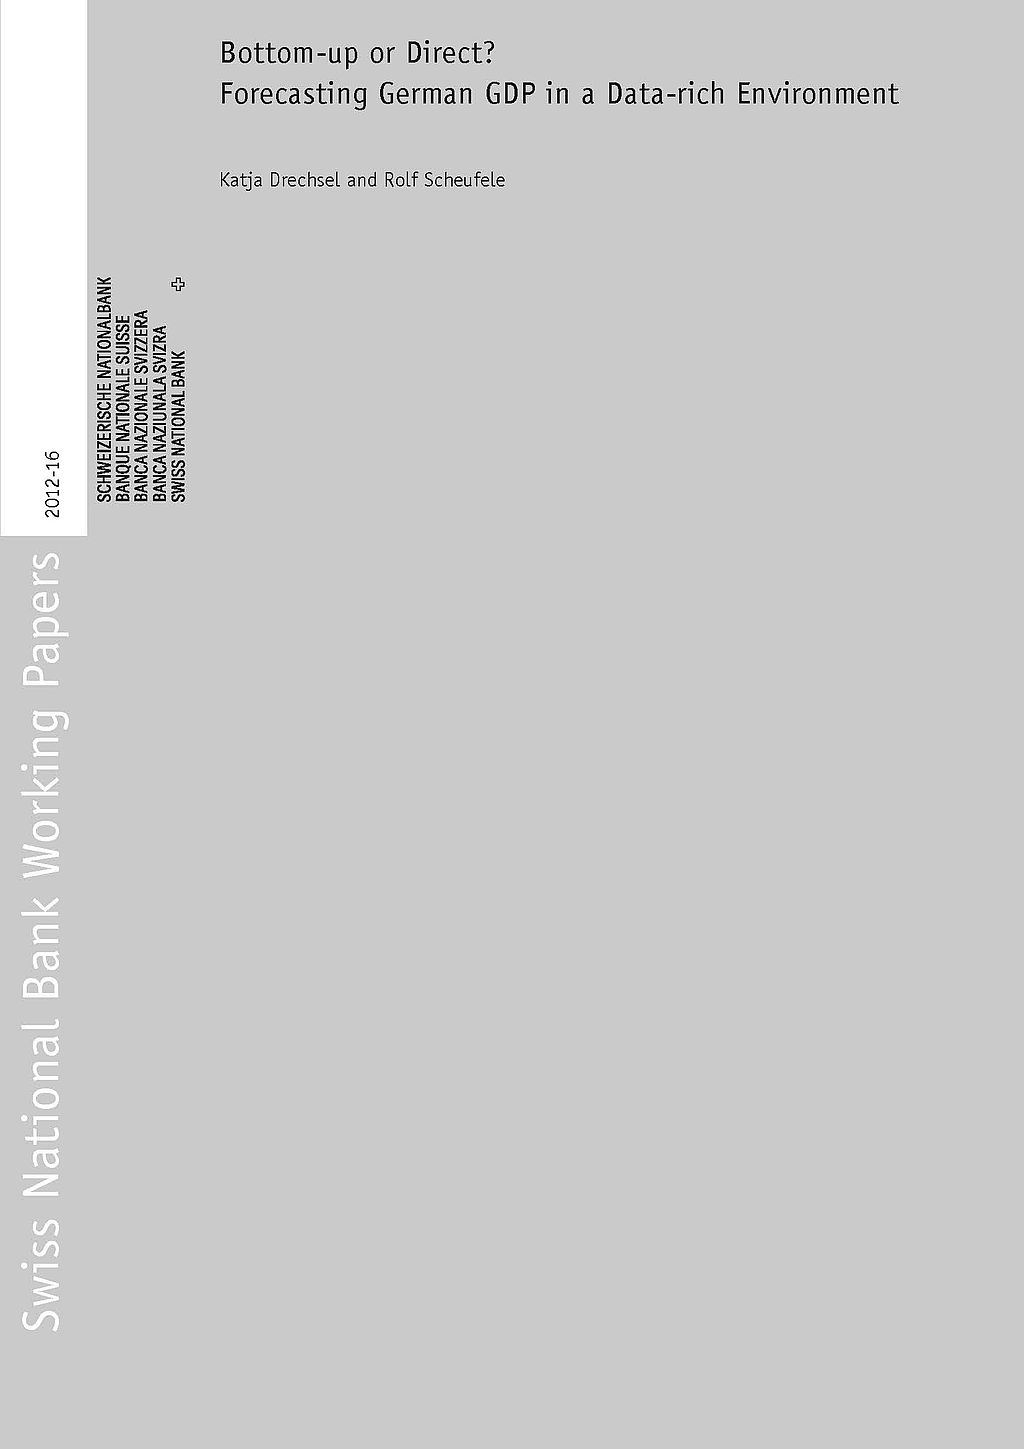 cover_Swiss-National-Bank-Working-Papers_2012-november-16.jpg